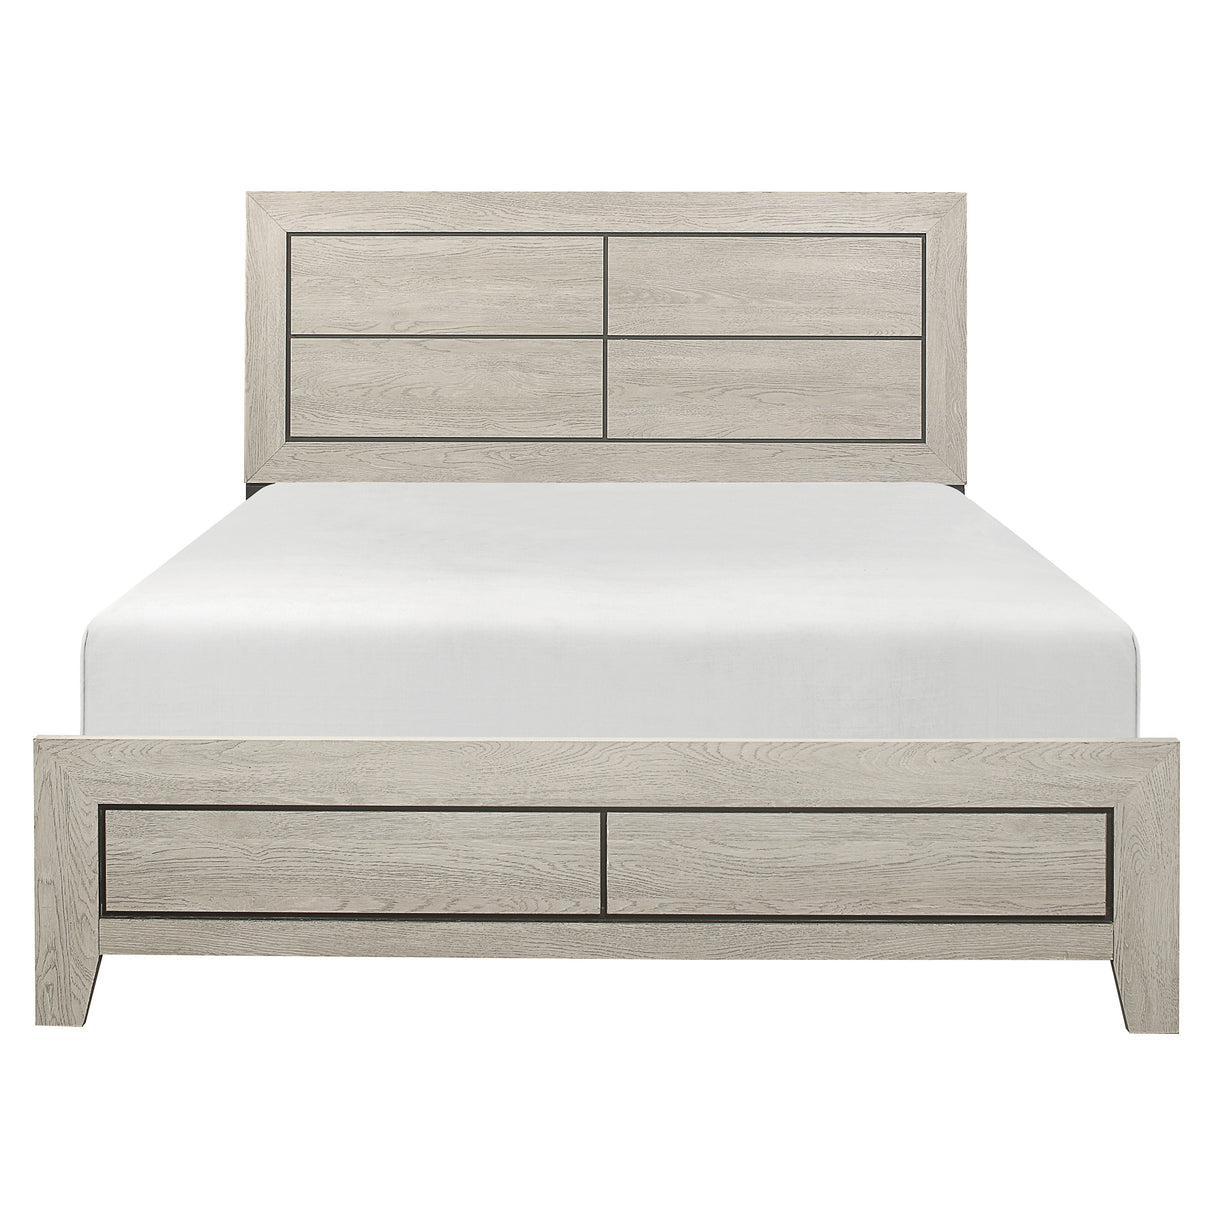 Quinby Light Brown Queen Bed